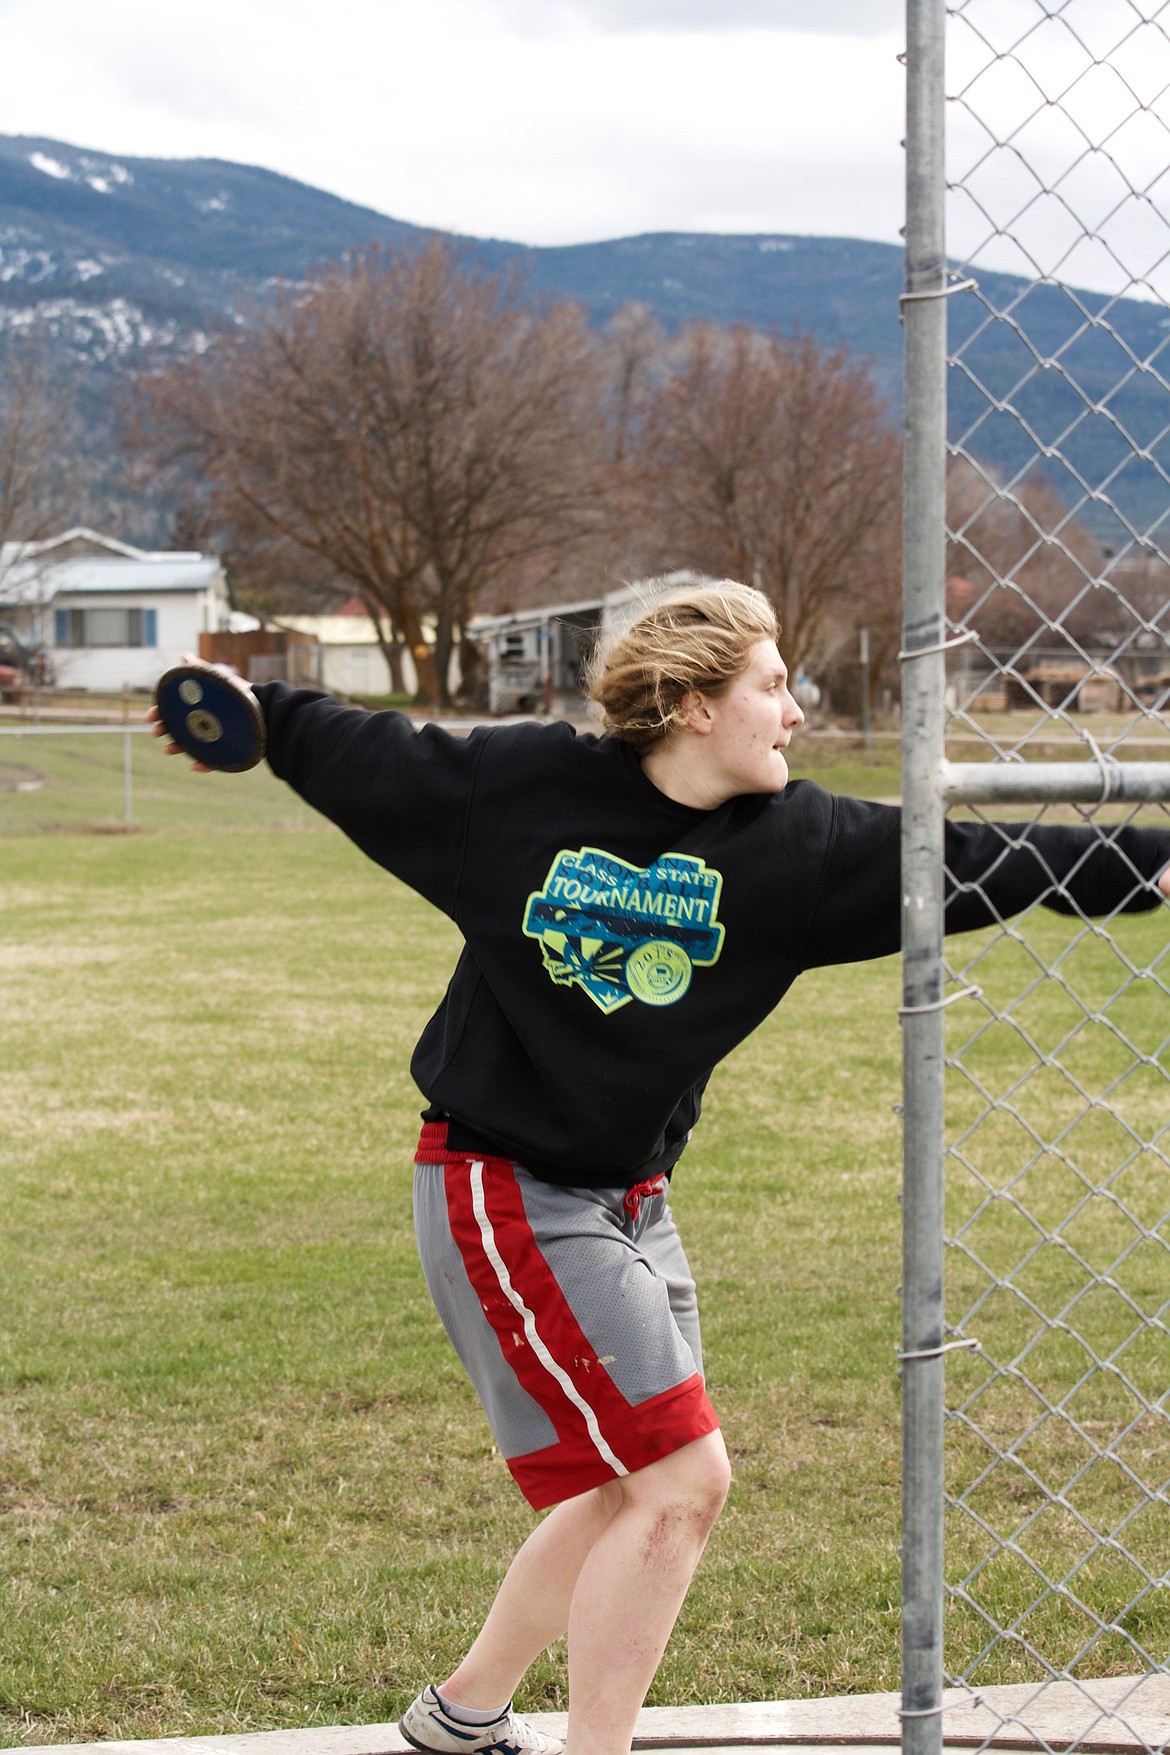 JESSICA THOMPSON of the Plains team begins her slide and throw of the discus during a recent practice. (Douglas Wilks photos/Clark Fork Valley Press)